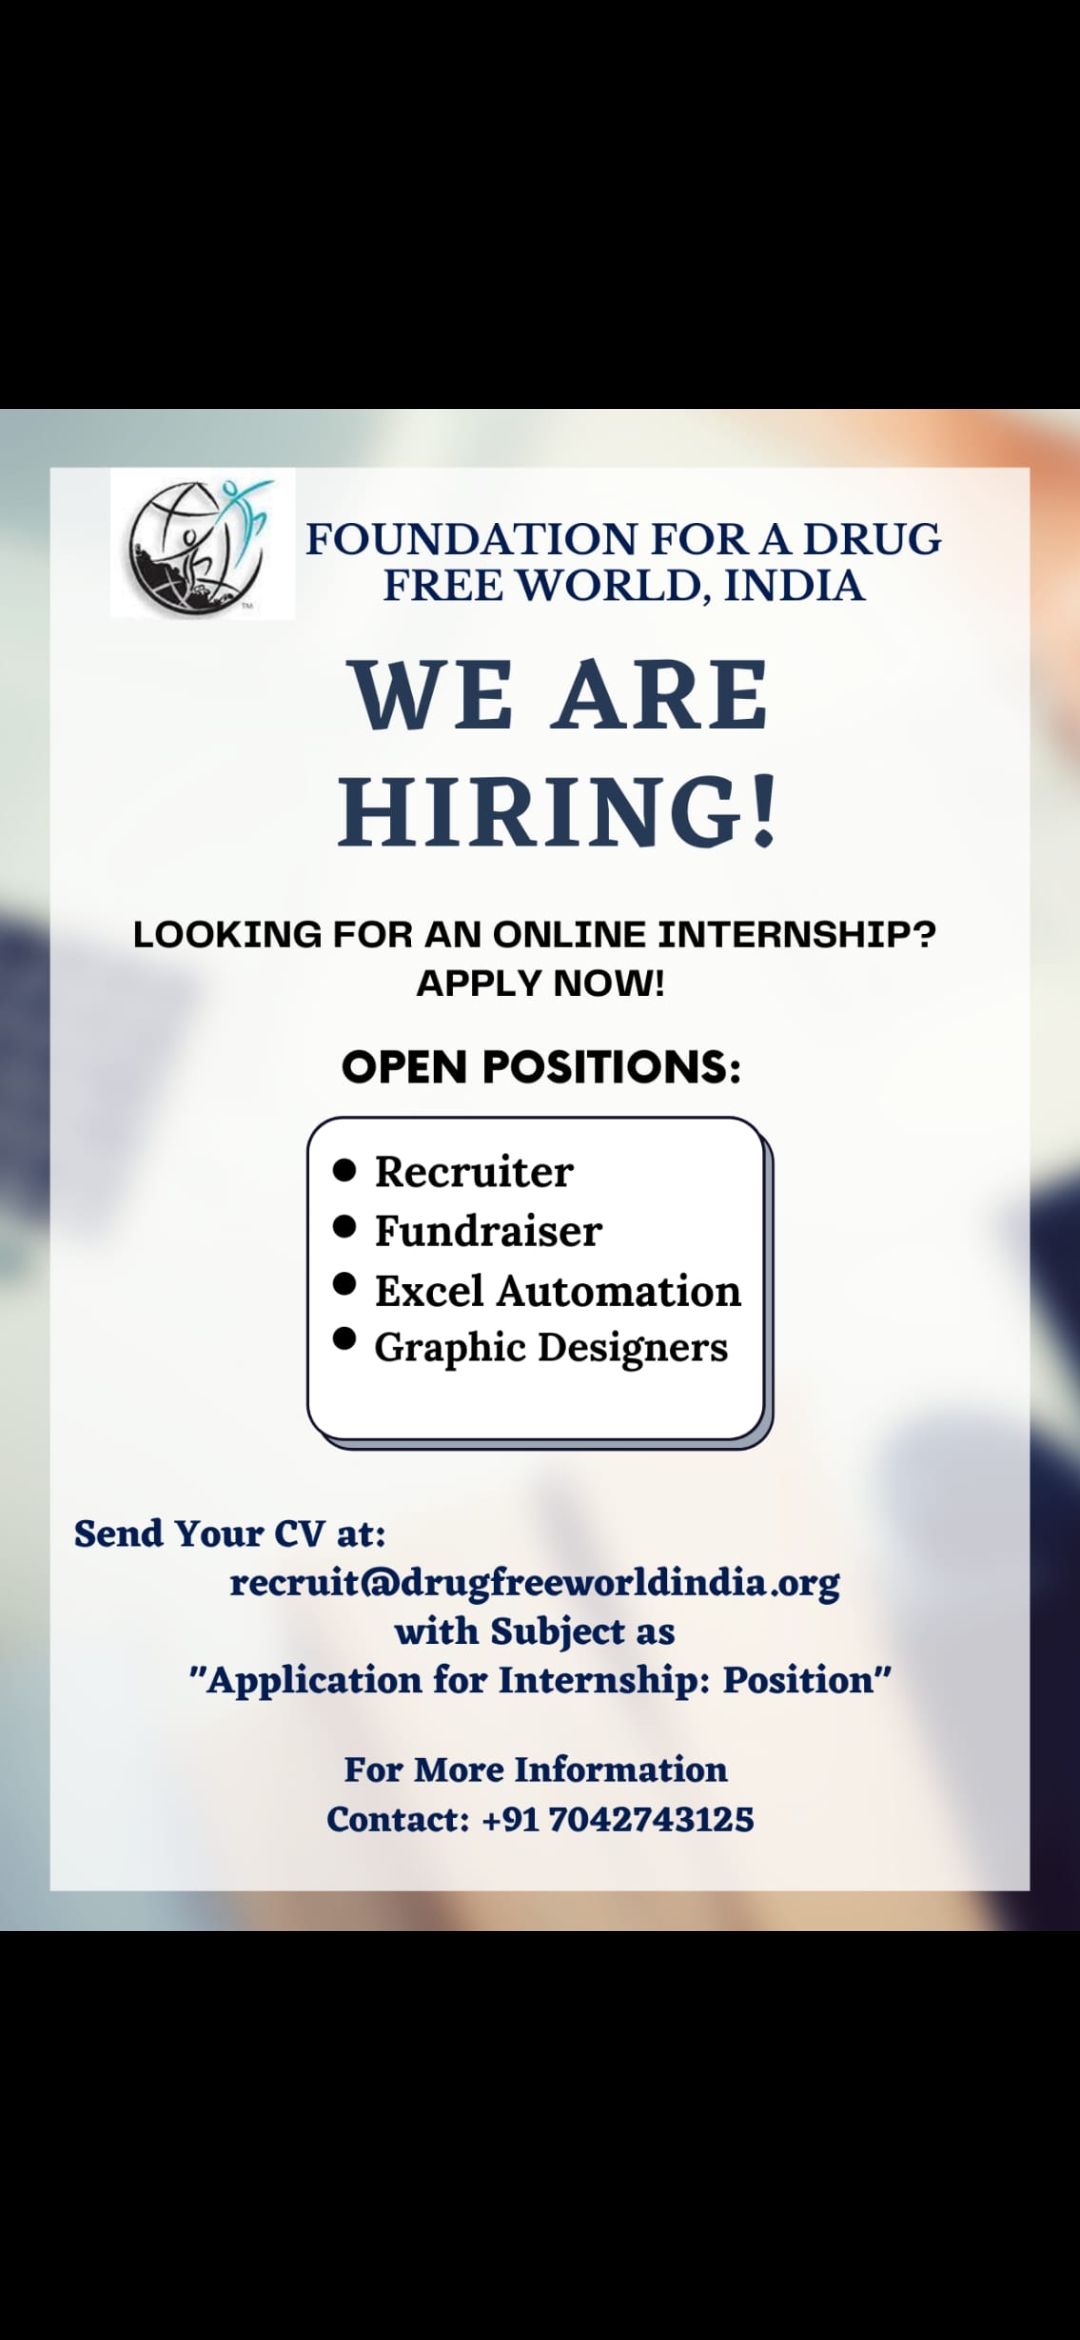 FOUNDATION FOR A DRUG-FREE WORLD, INDIA : We are Hiring